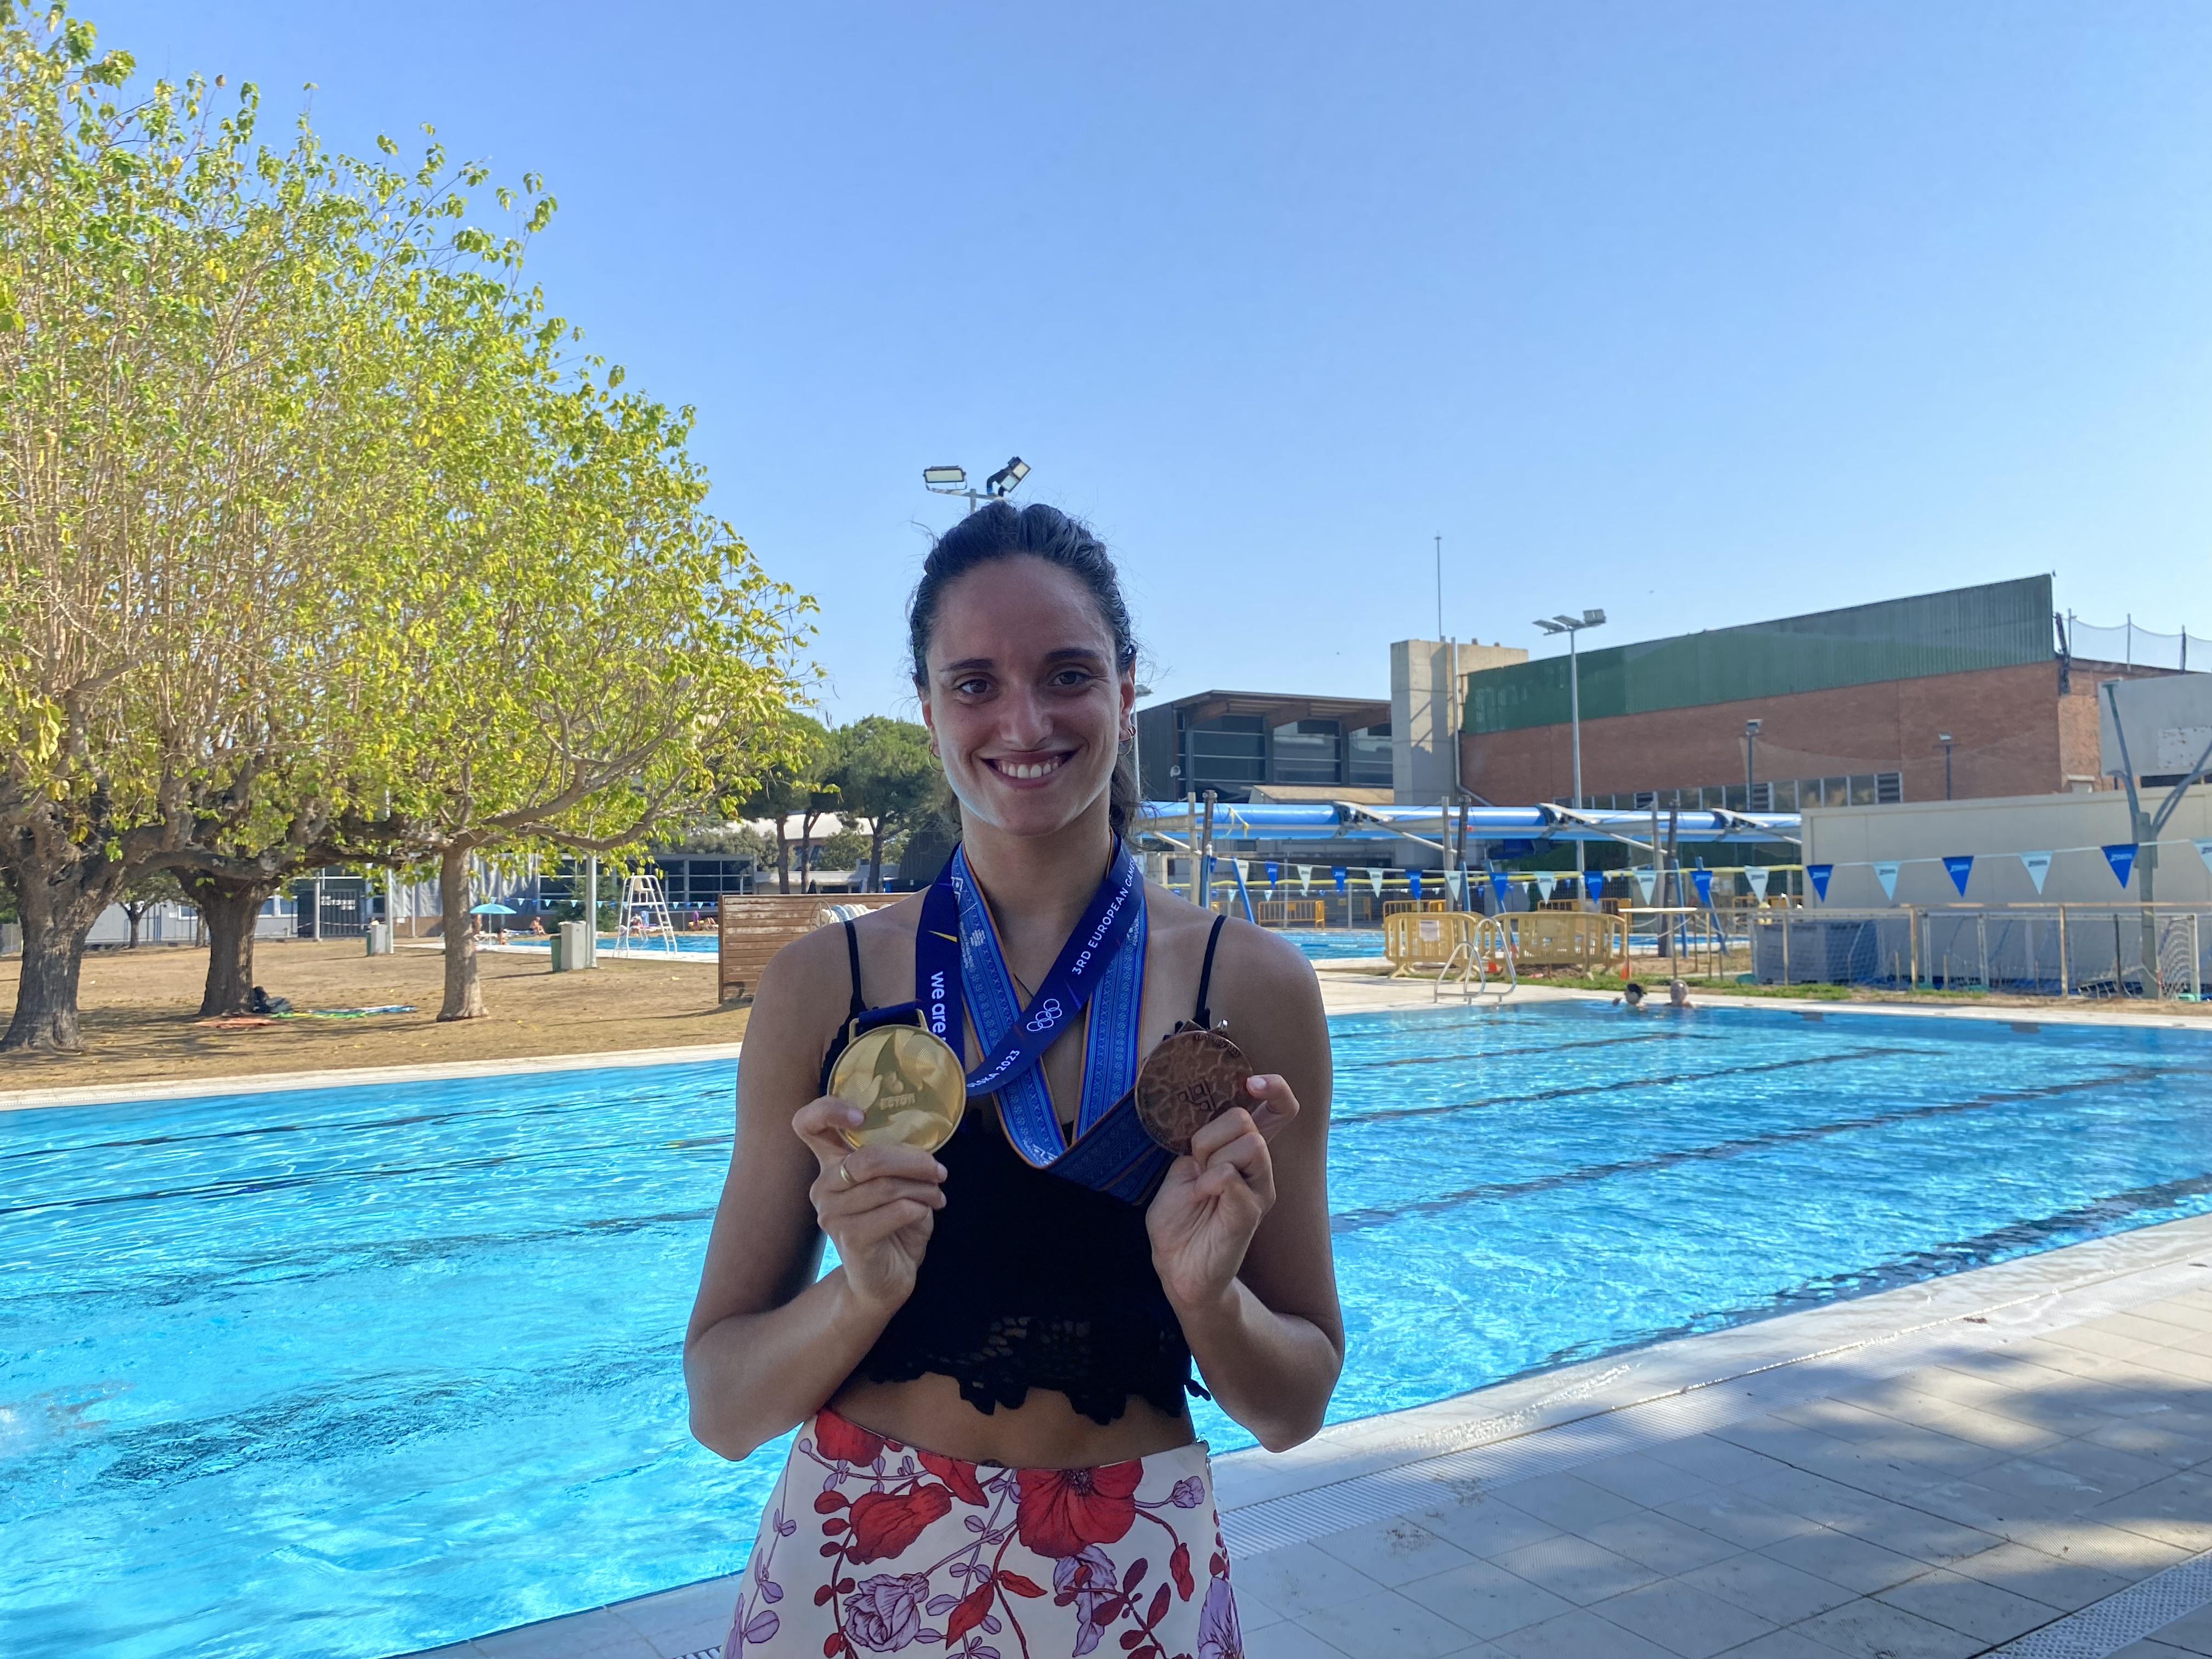 Mireia Hernández won a gold medal at the European Games in Poland and a bronze medal at the 2023 World Aquatics Championship in July in Fukuoka, Japan.